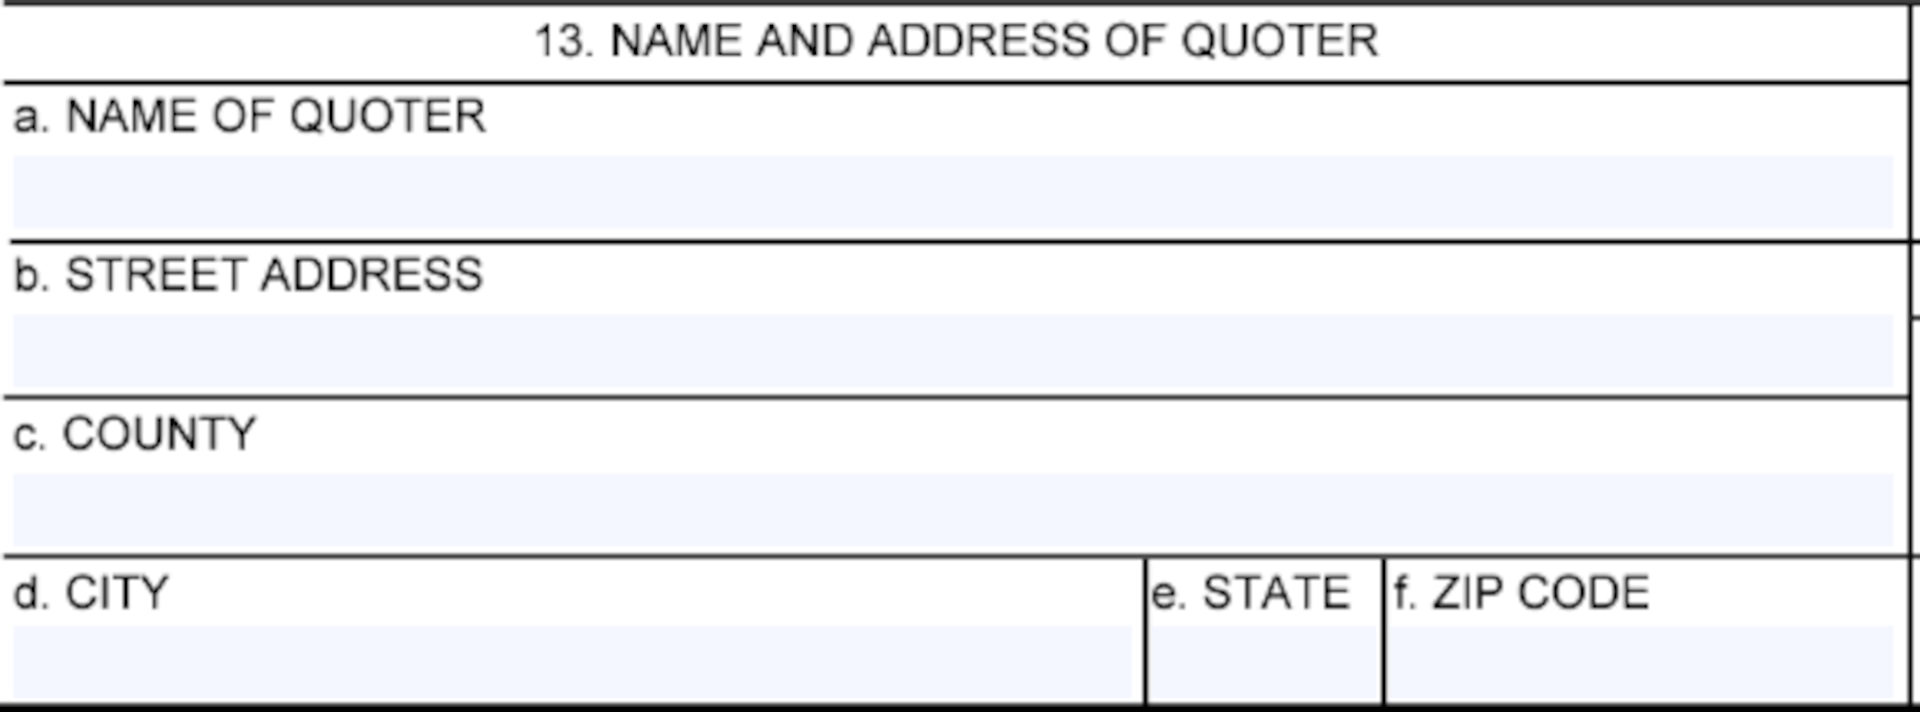 Box 13 of the Request for Quotation (SF18) for Name and Address information of the Quoter.